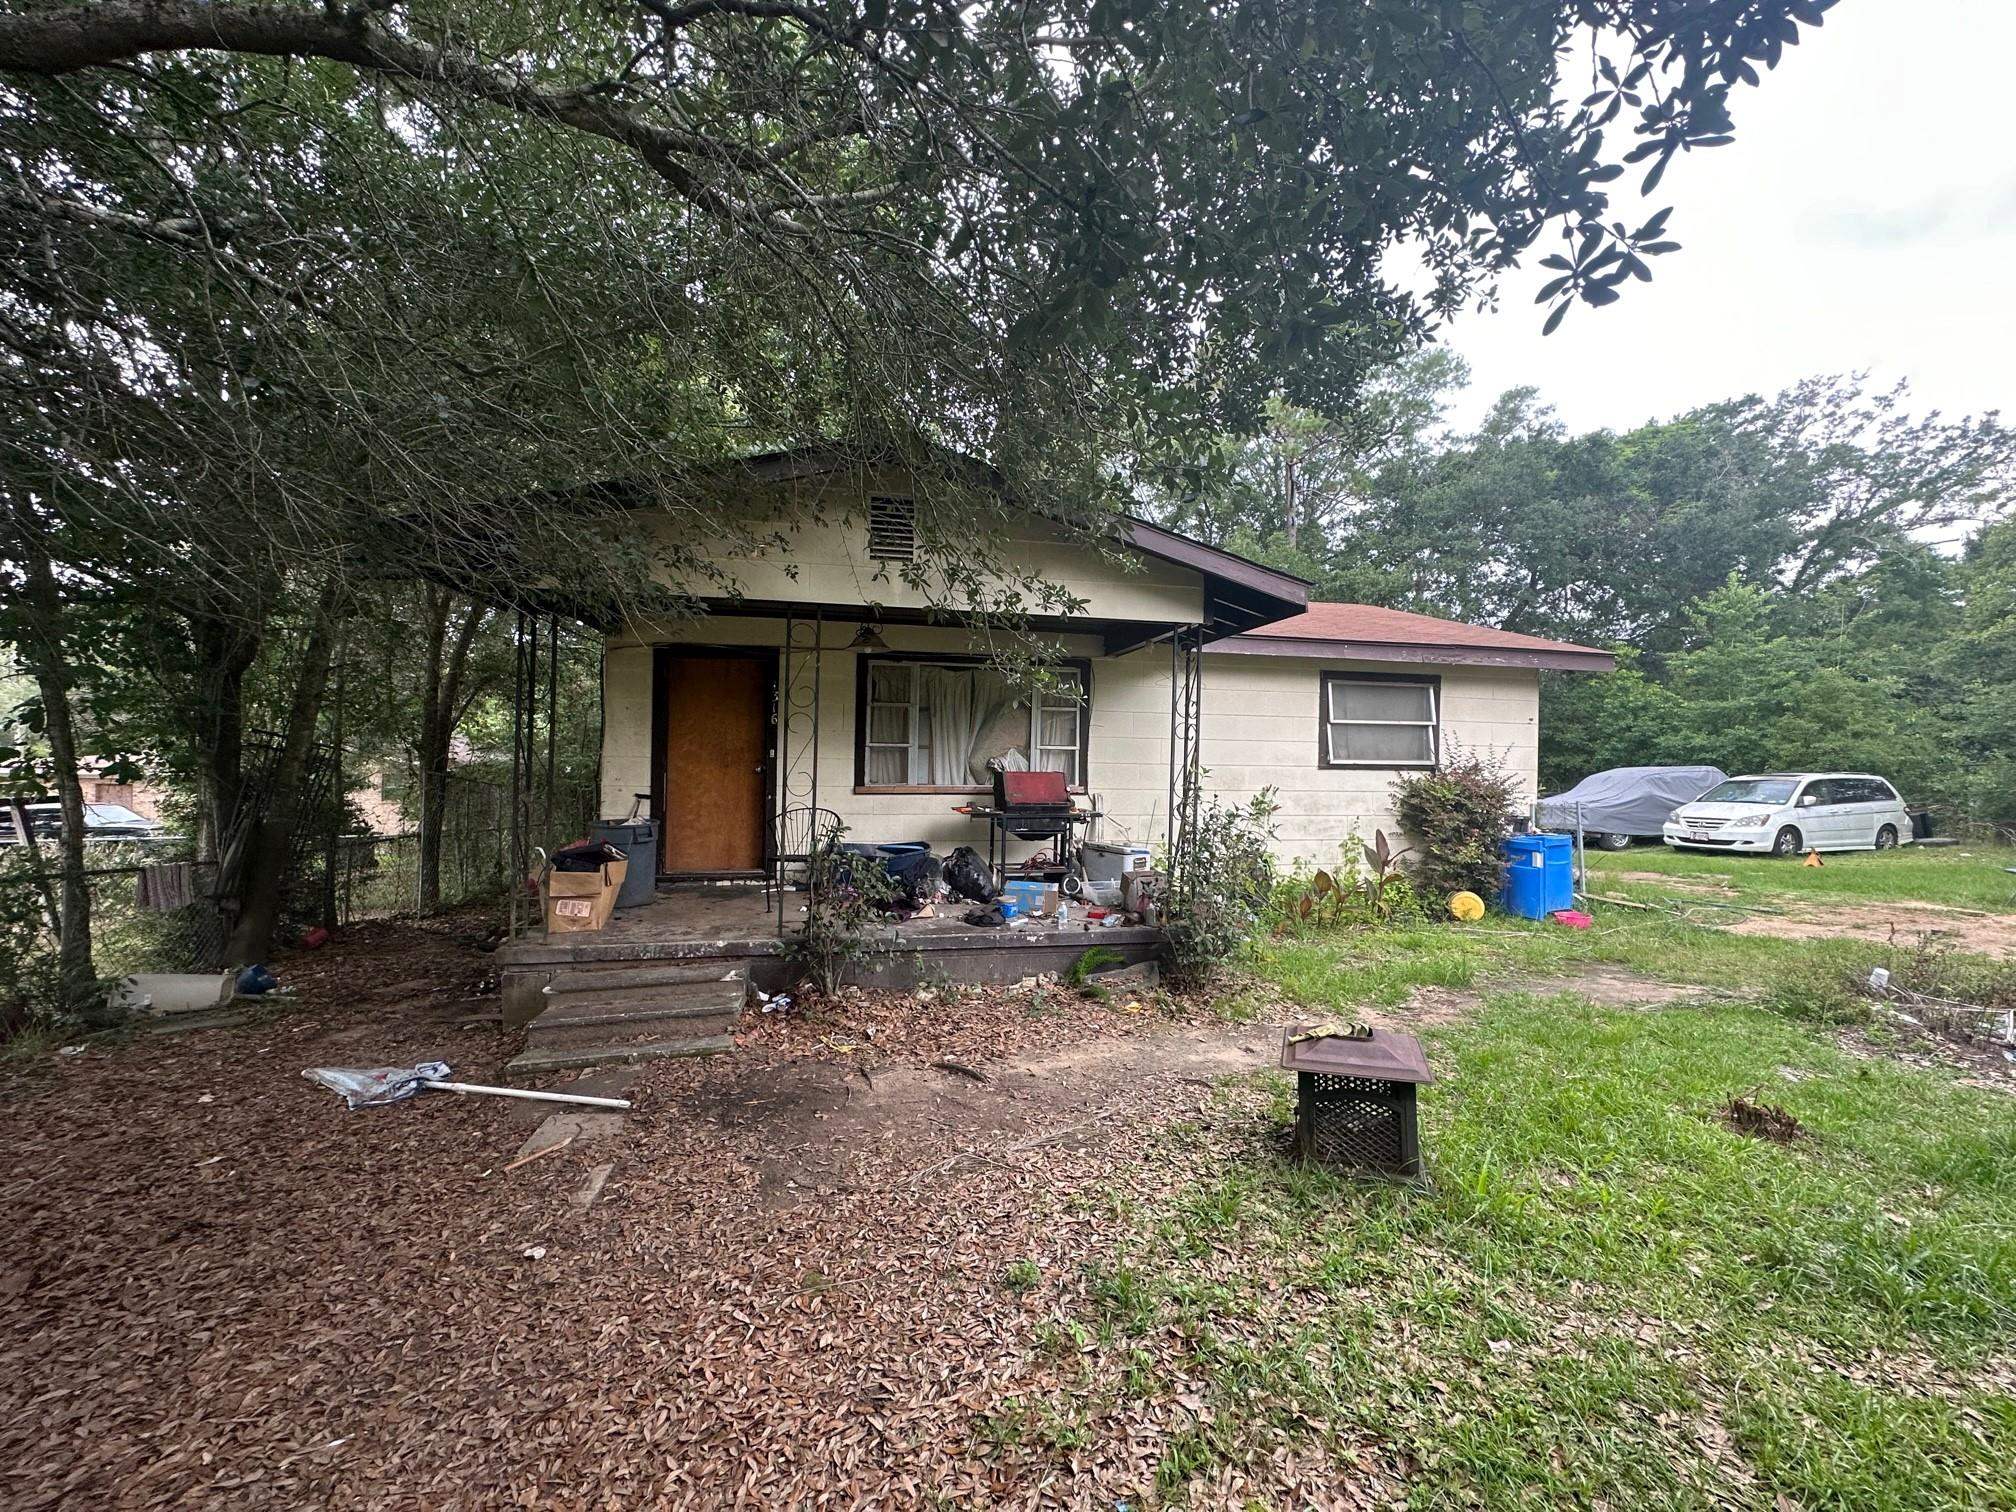 Home in need of restoration and renovation. Easy flip or great rental home near FSU, TCC, and FAMU. Refer to pictures to see where the house's lot edge is in relation to the lot right next door, which is also available for sale, listed separately.